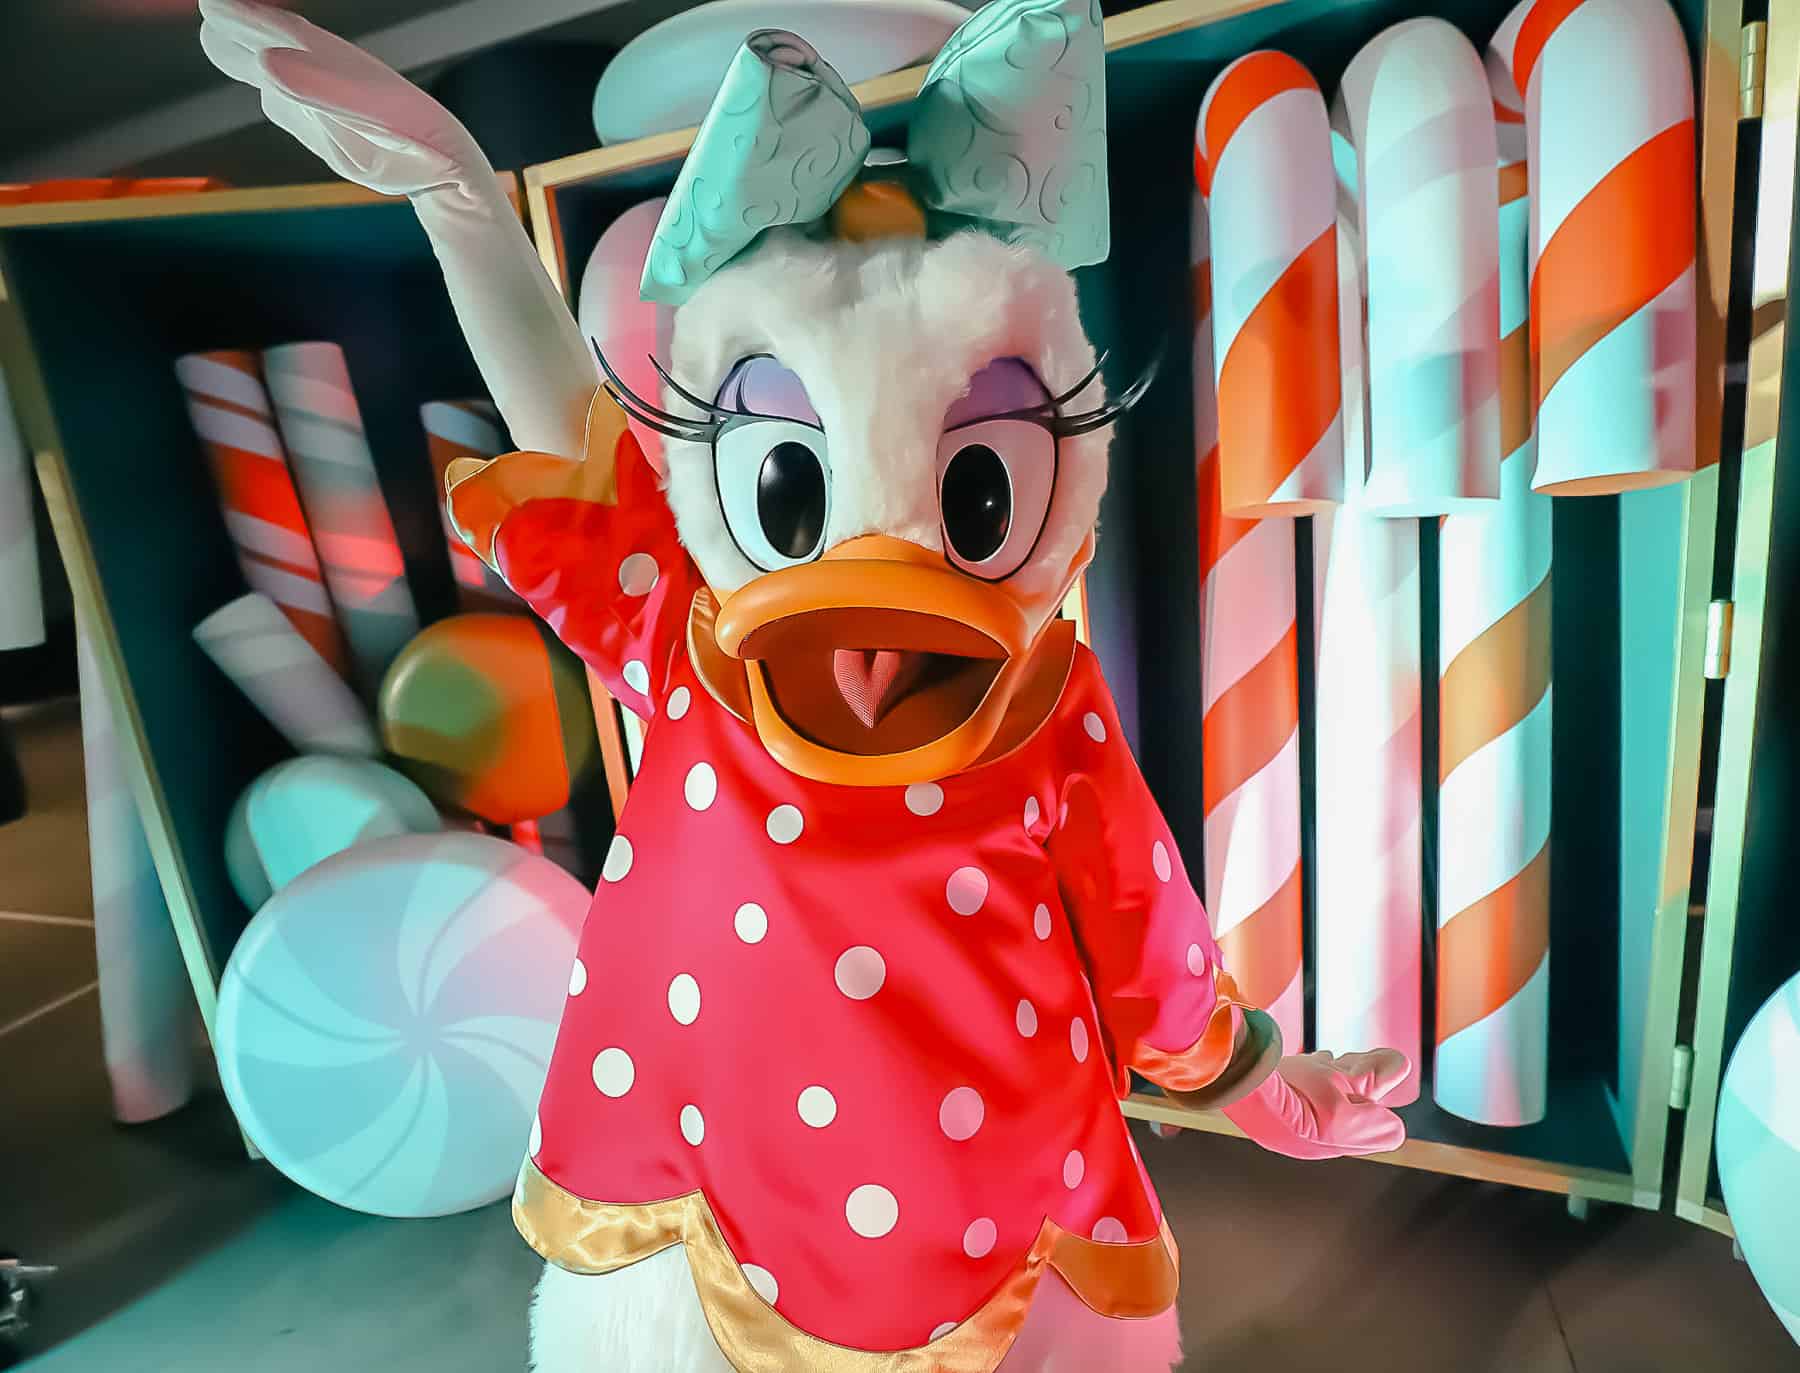 Daisy Duck poses like a diva with a hot pink dress with white polka dots and a mint green bow. 